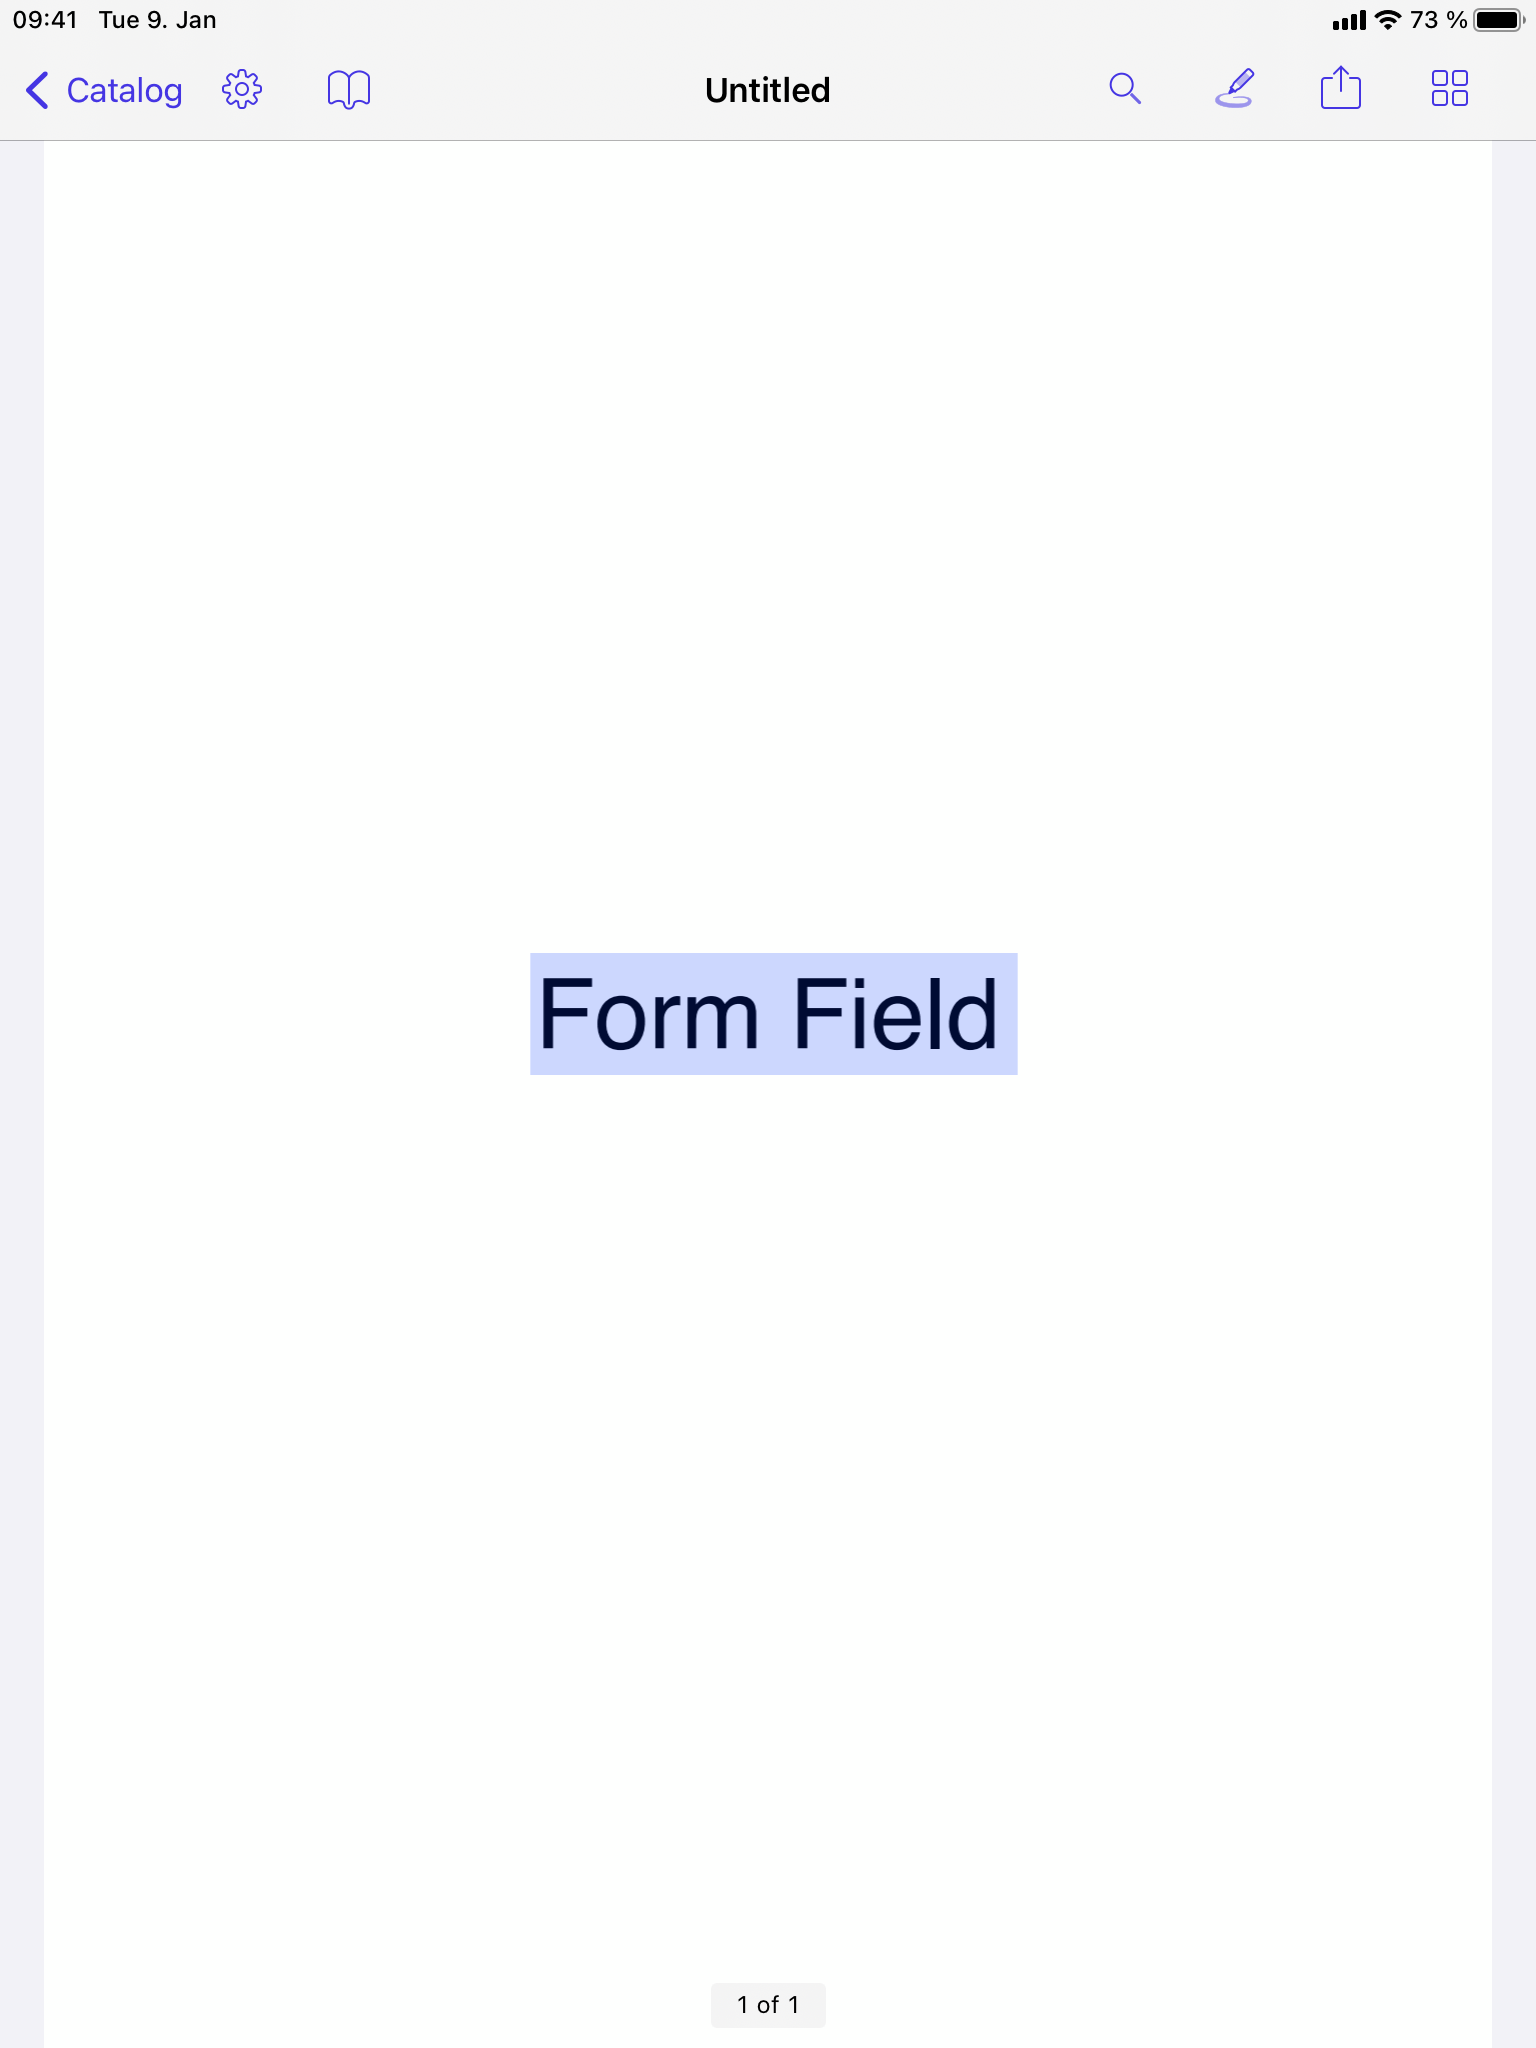 PSPDFKit form field annotation example